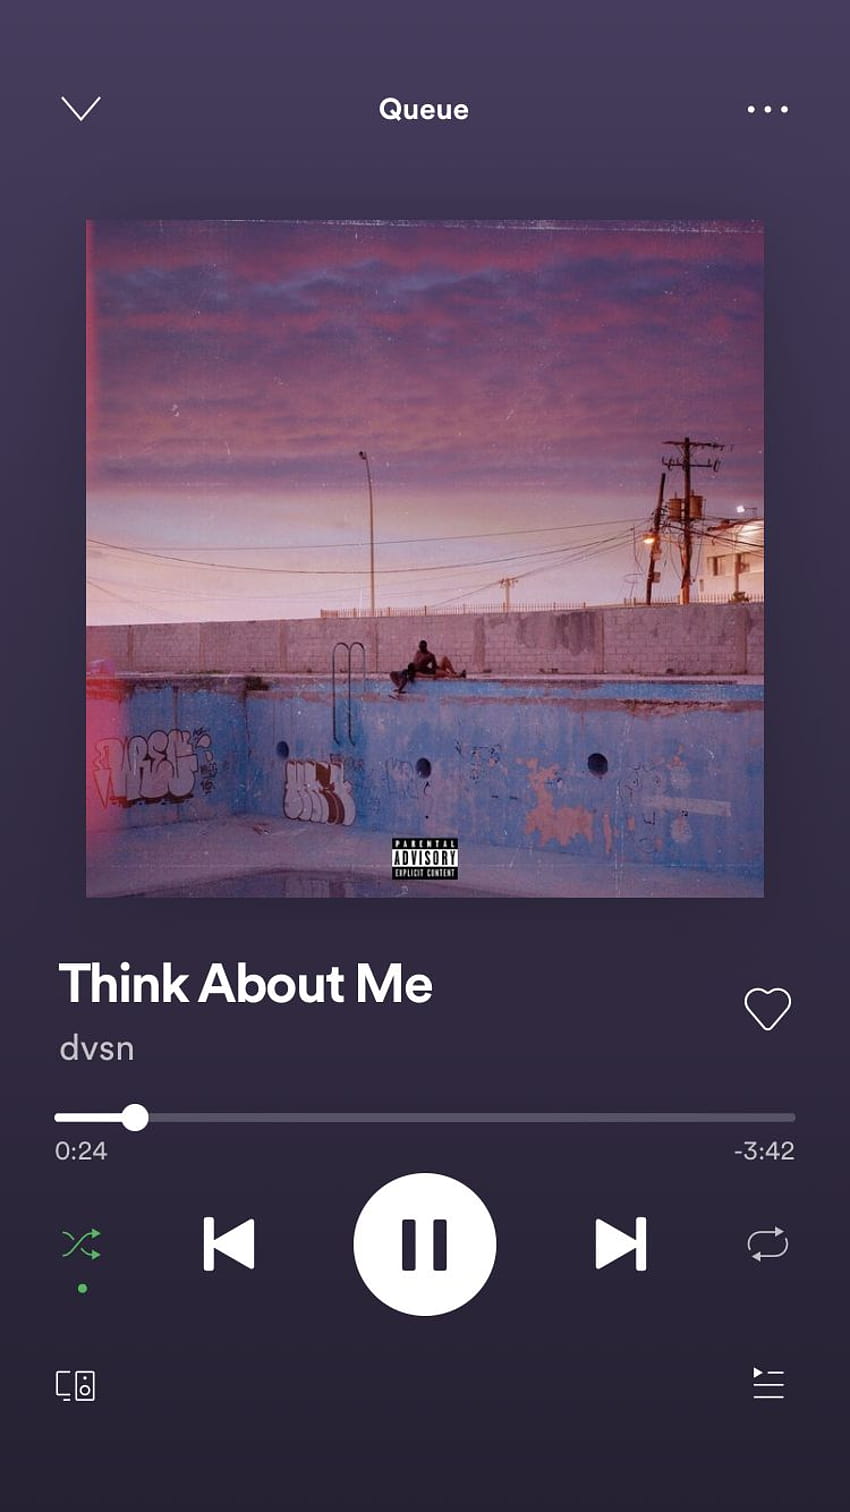 Think About Me, a song by dvsn on Spotify HD phone wallpaper